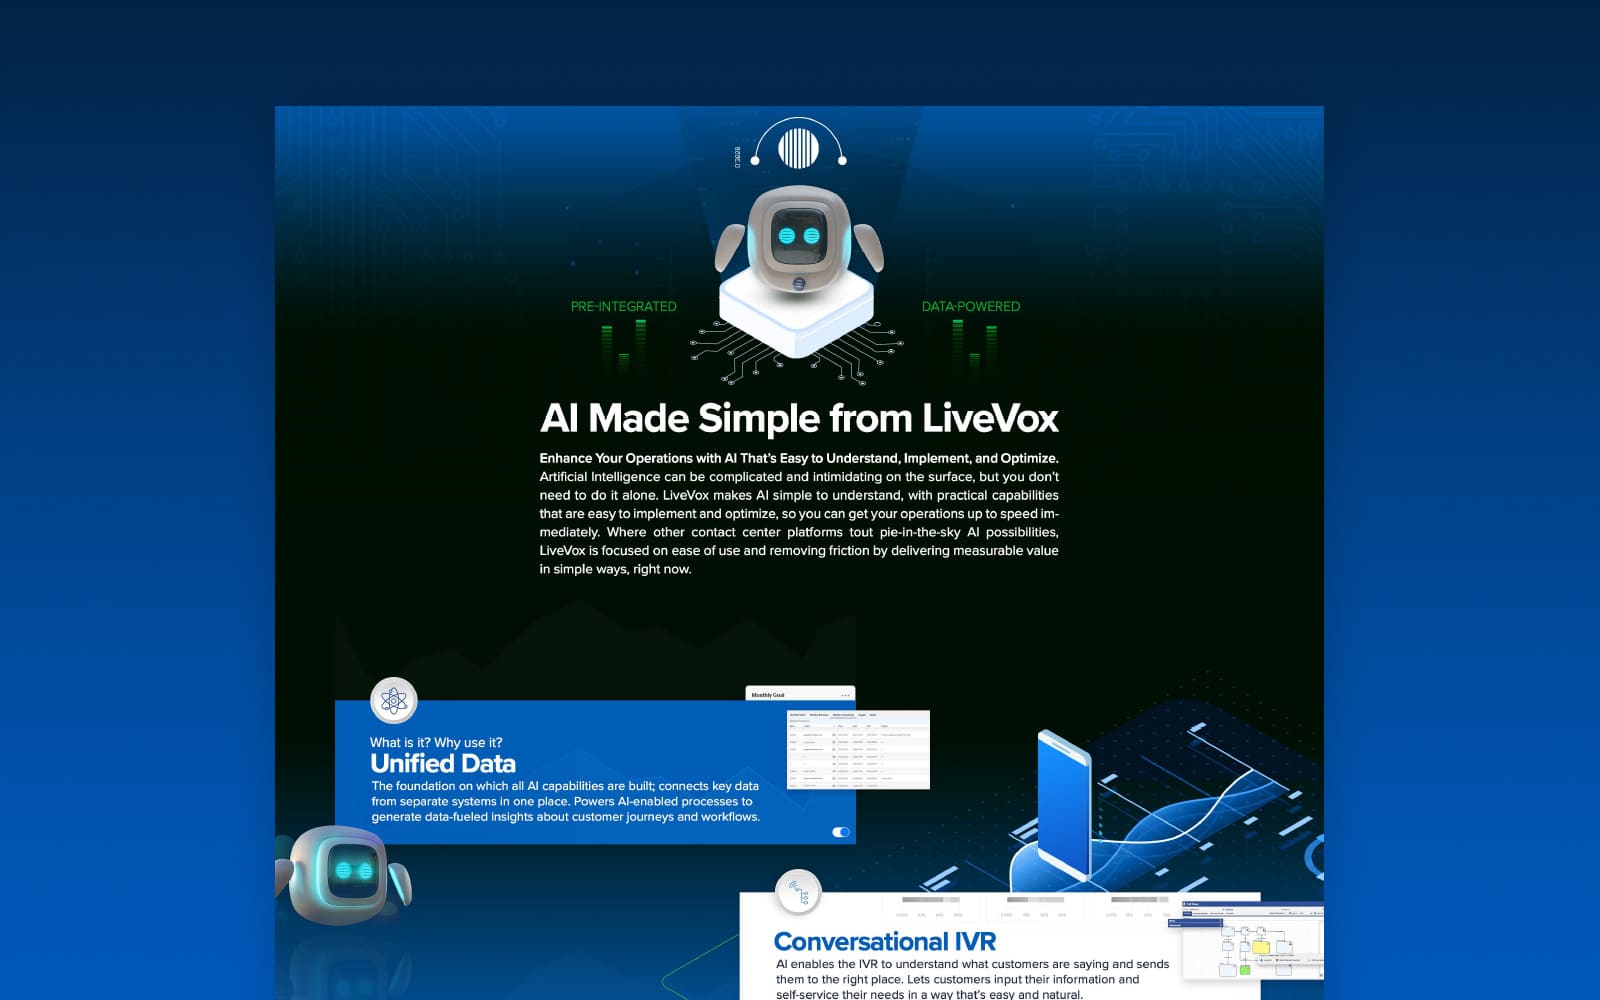 LiveVox [AI Made Simple / Download the Infographic]